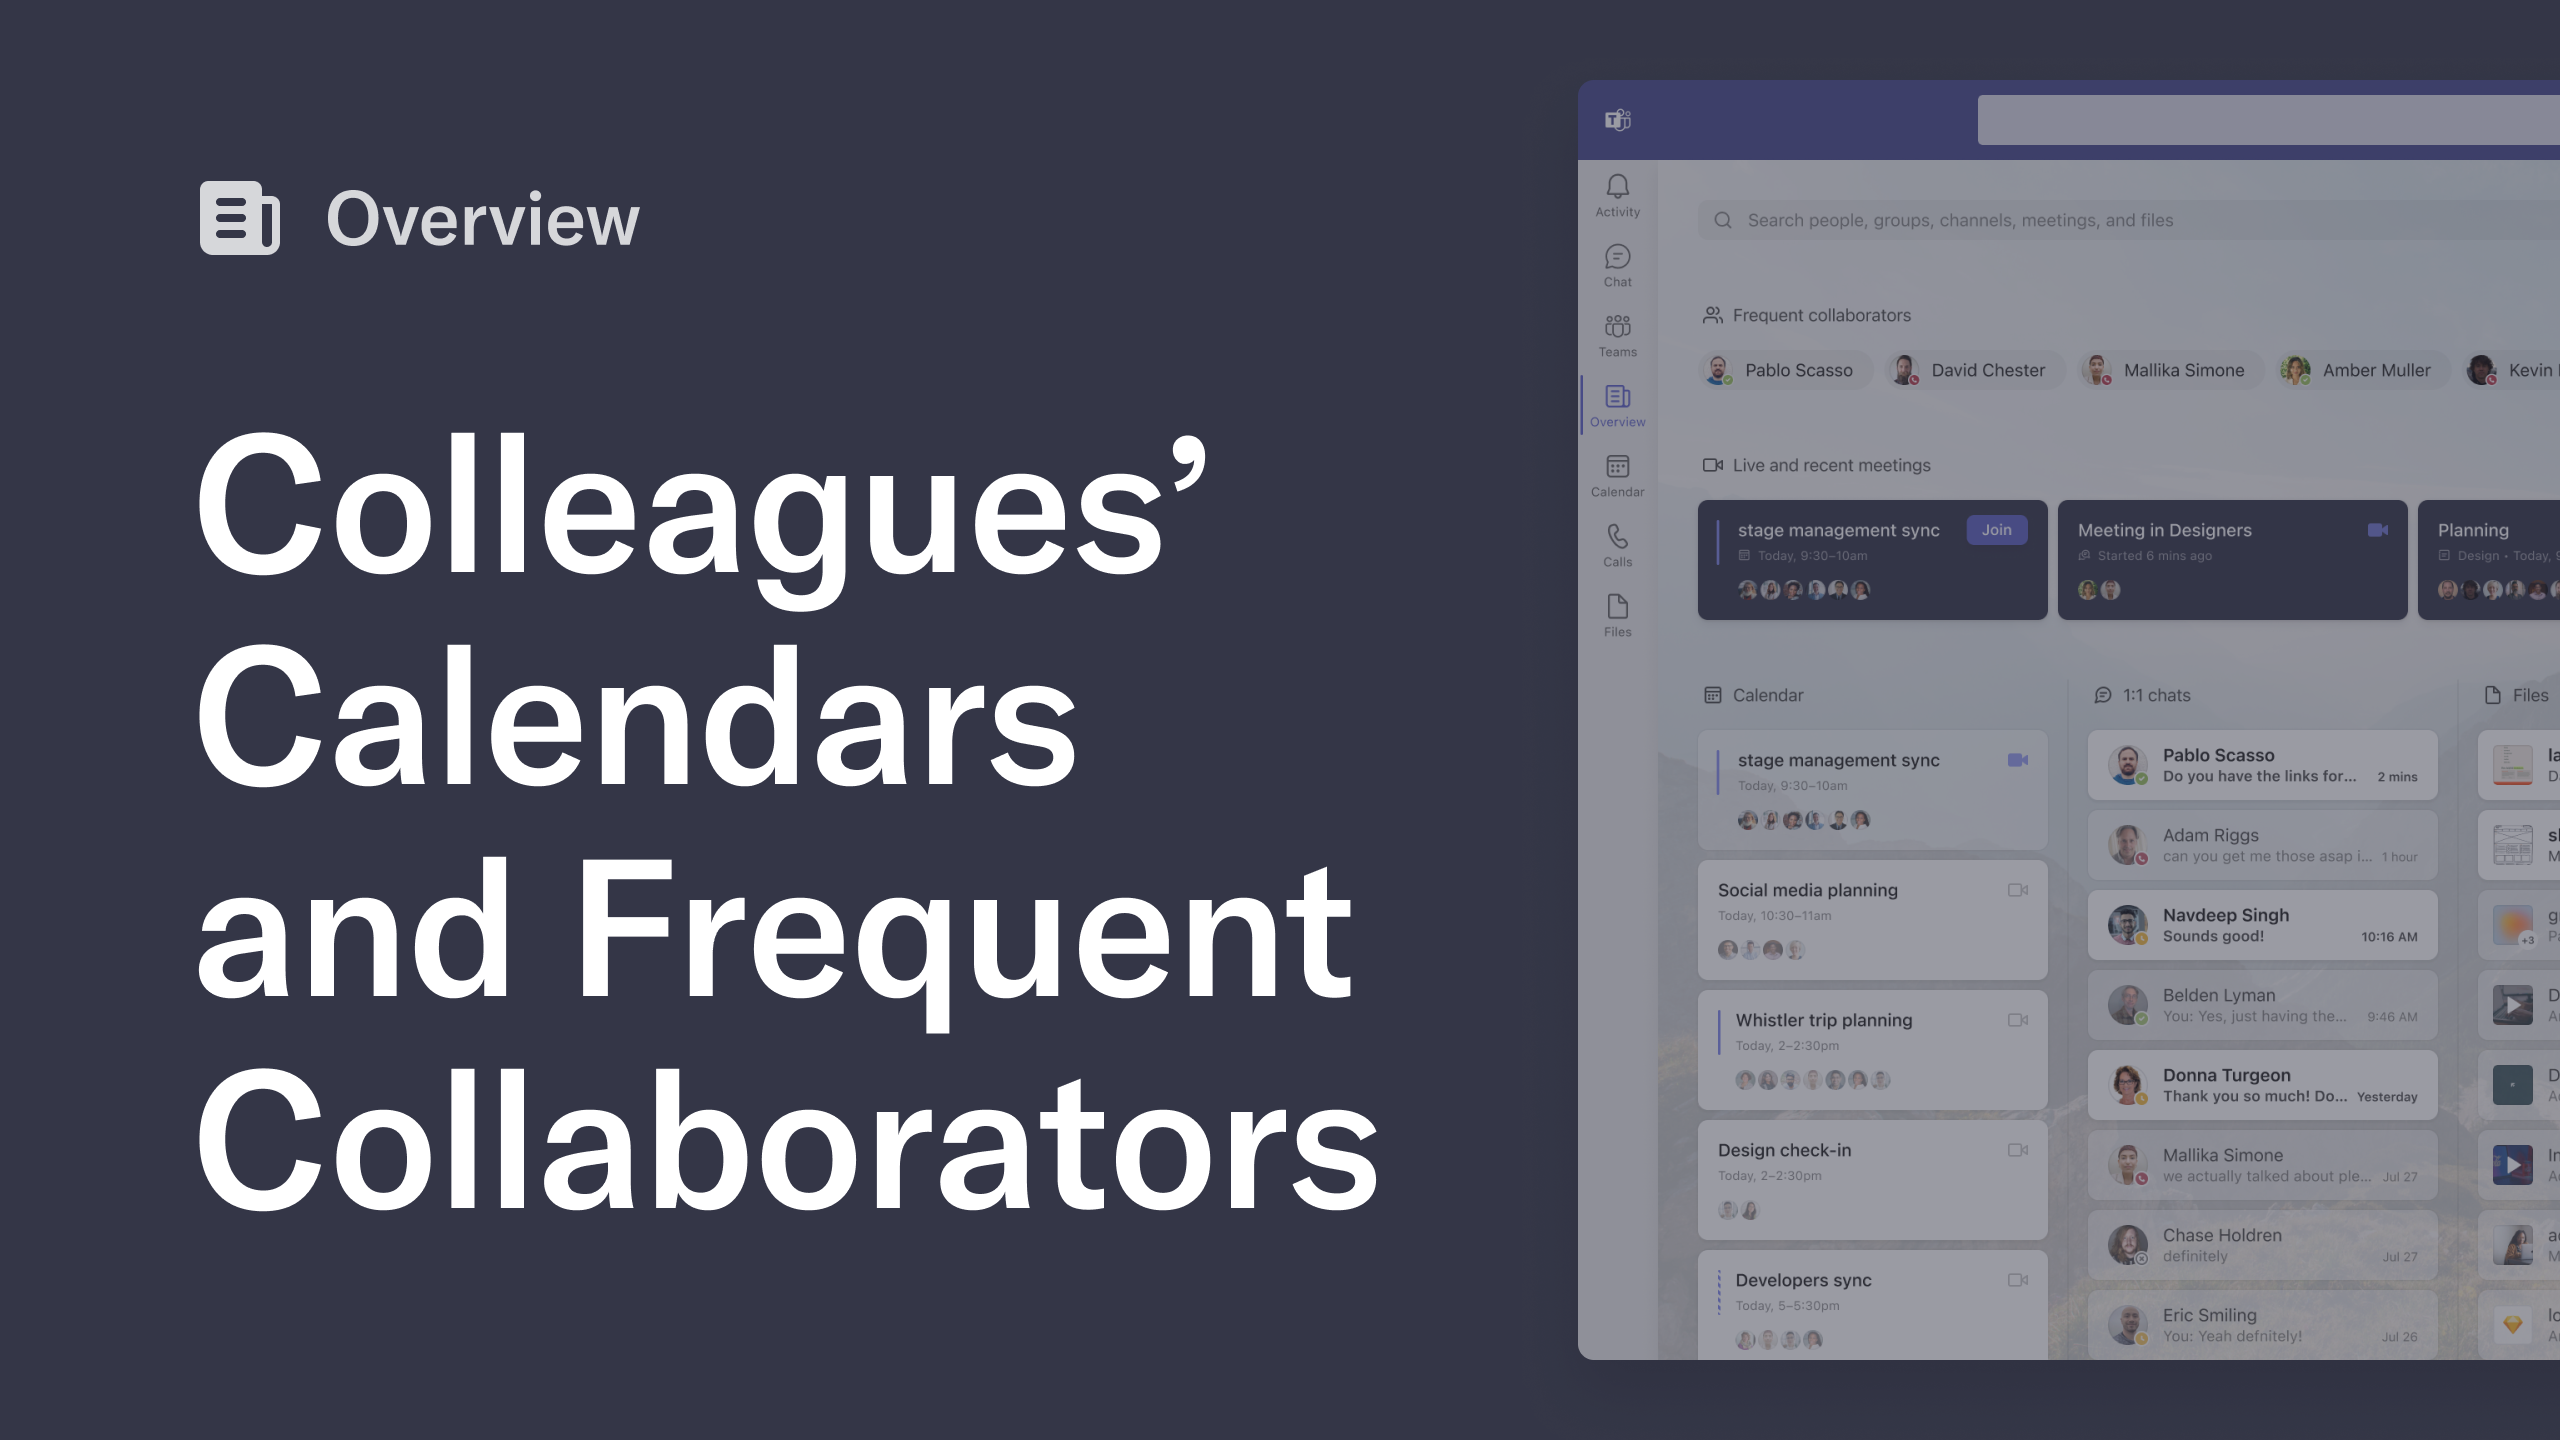 colleague calendars and frequent collaborators bar in overview